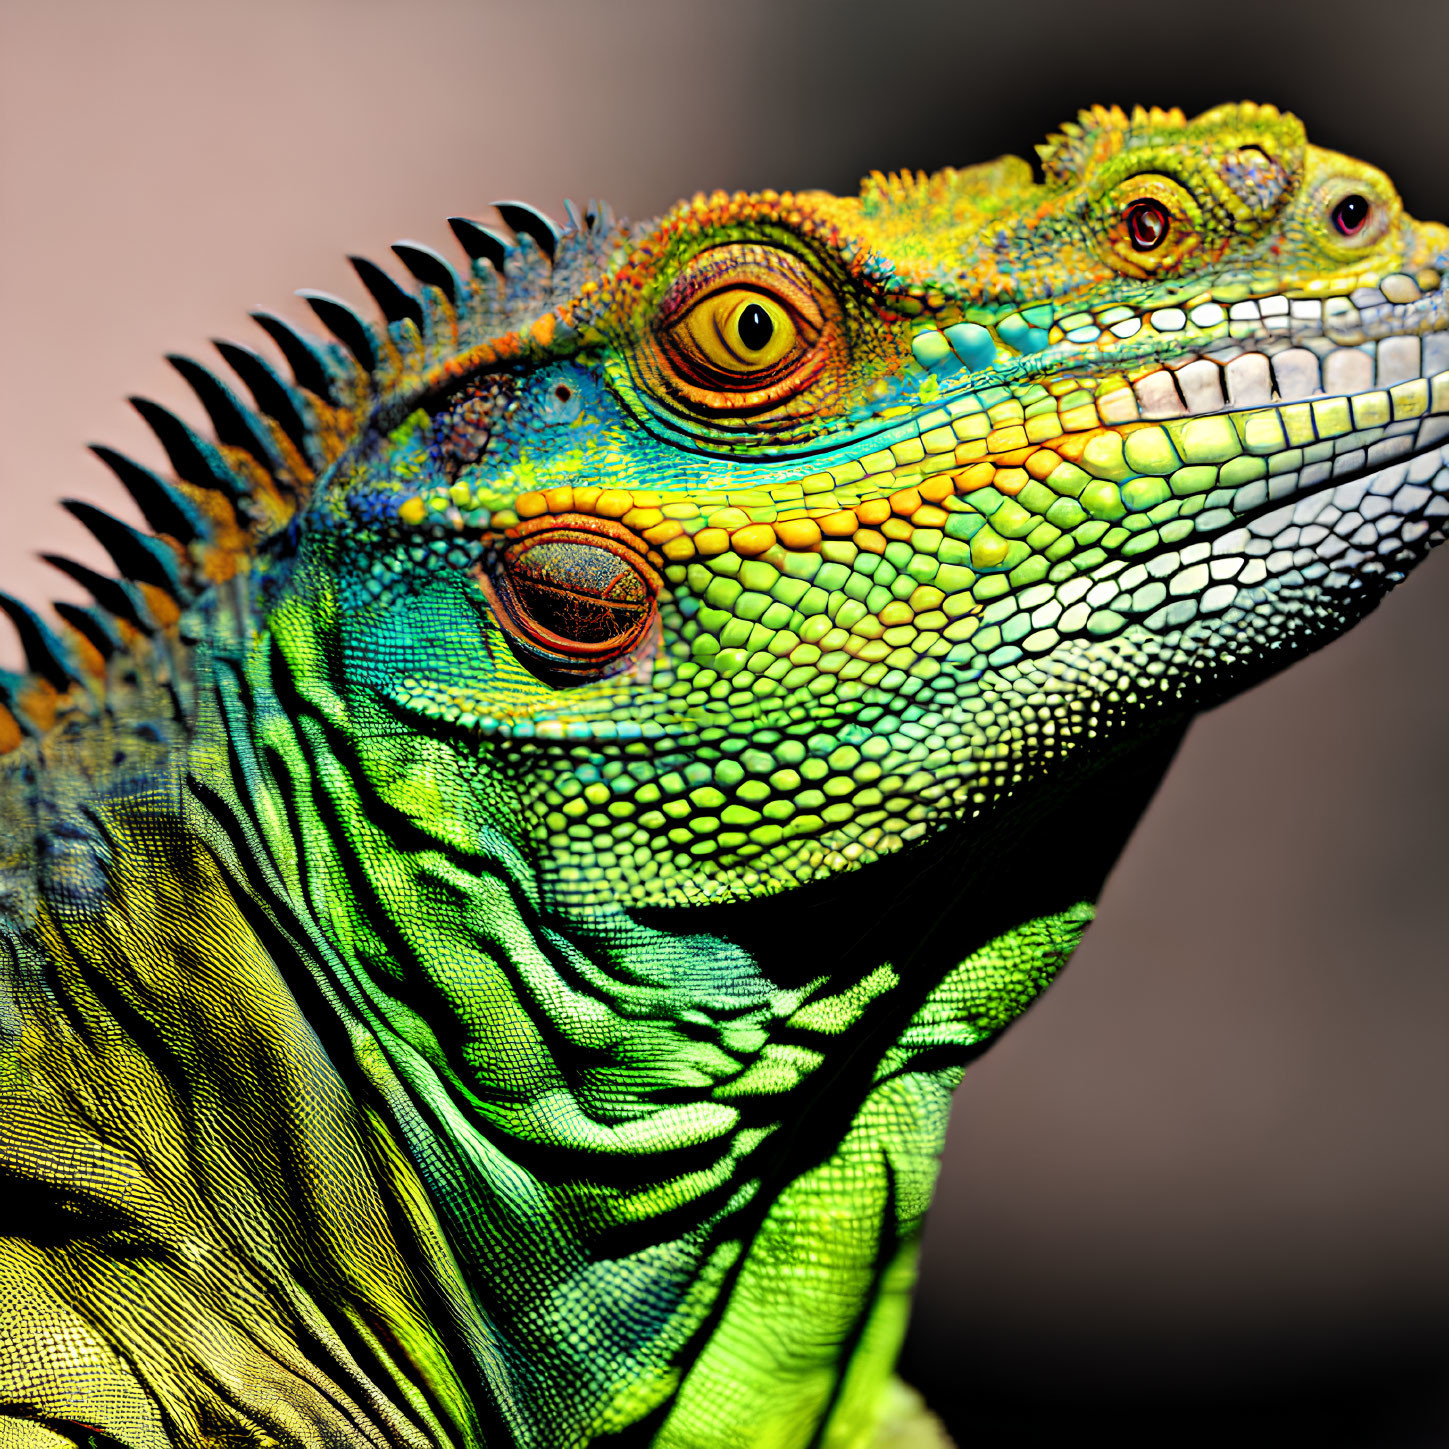 Vibrant green iguanas with spiny crests and textured scales